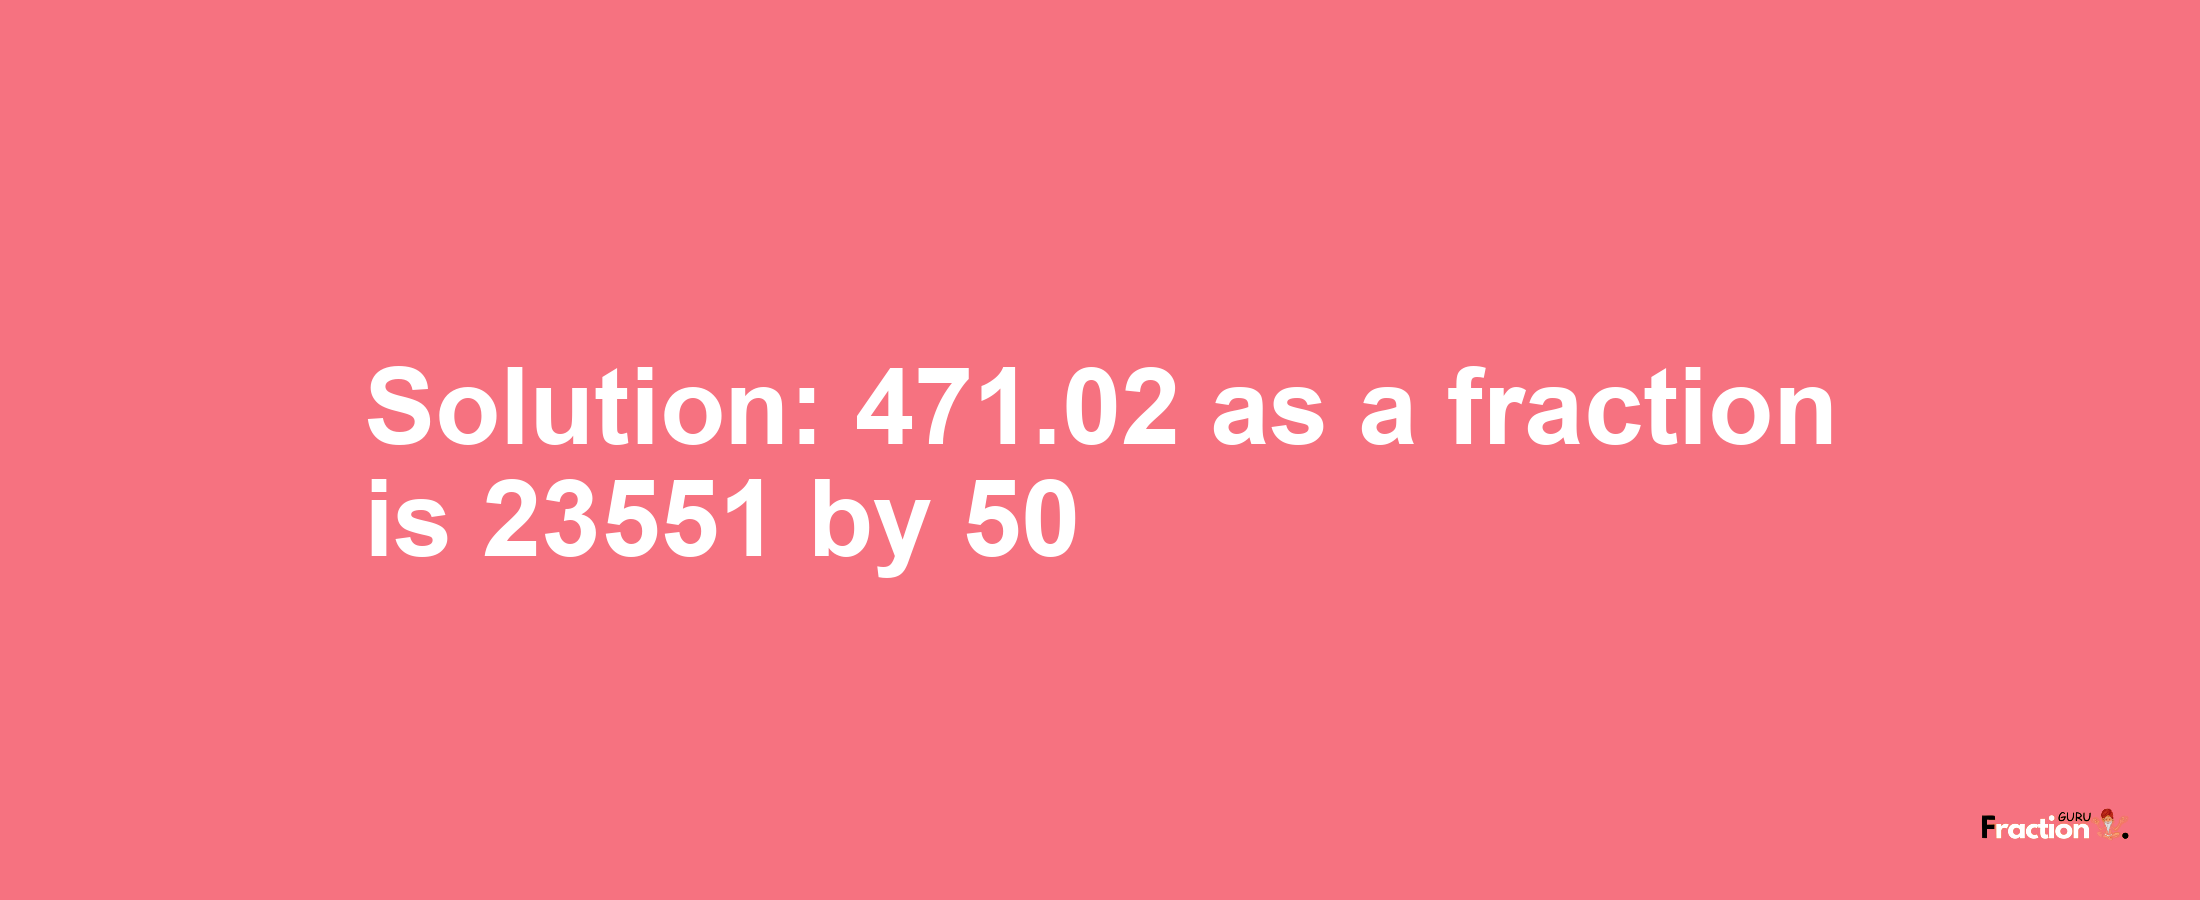 Solution:471.02 as a fraction is 23551/50